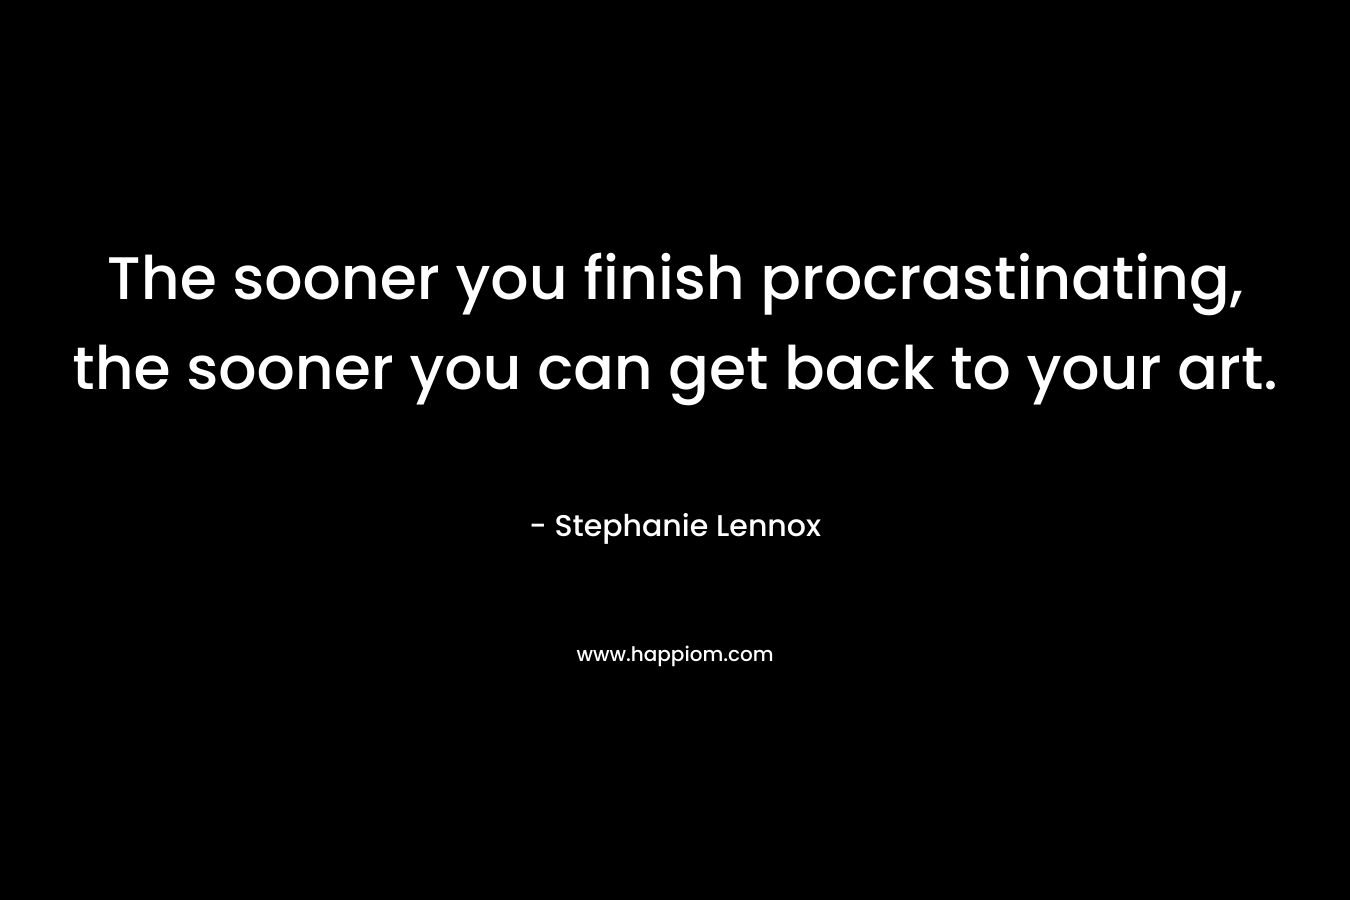 The sooner you finish procrastinating, the sooner you can get back to your art. – Stephanie Lennox